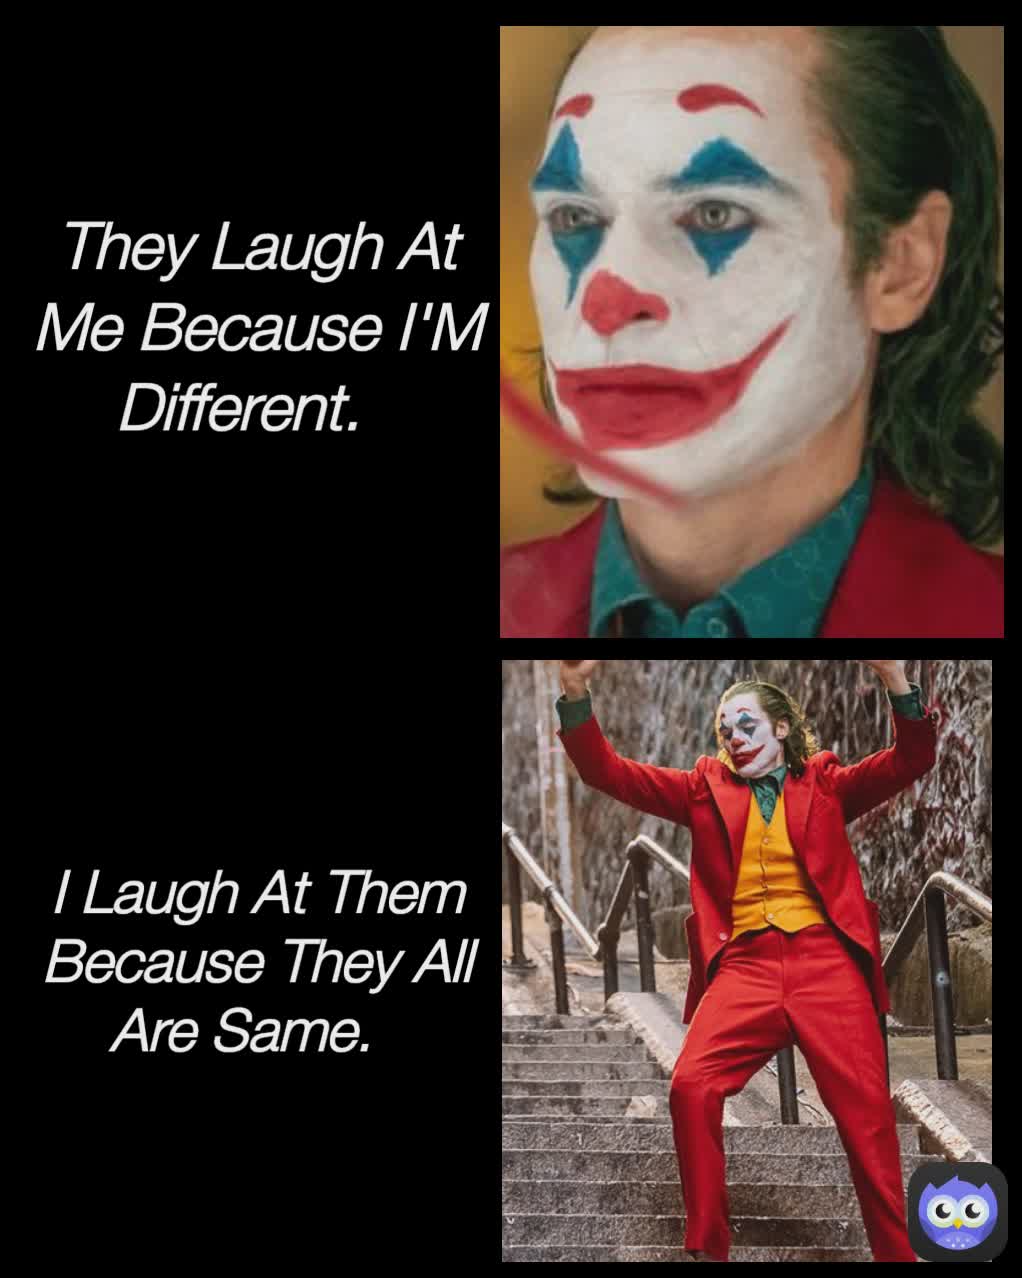 I Laugh At Them Because They All Are Same. They Laugh At Me Because I'M Different.